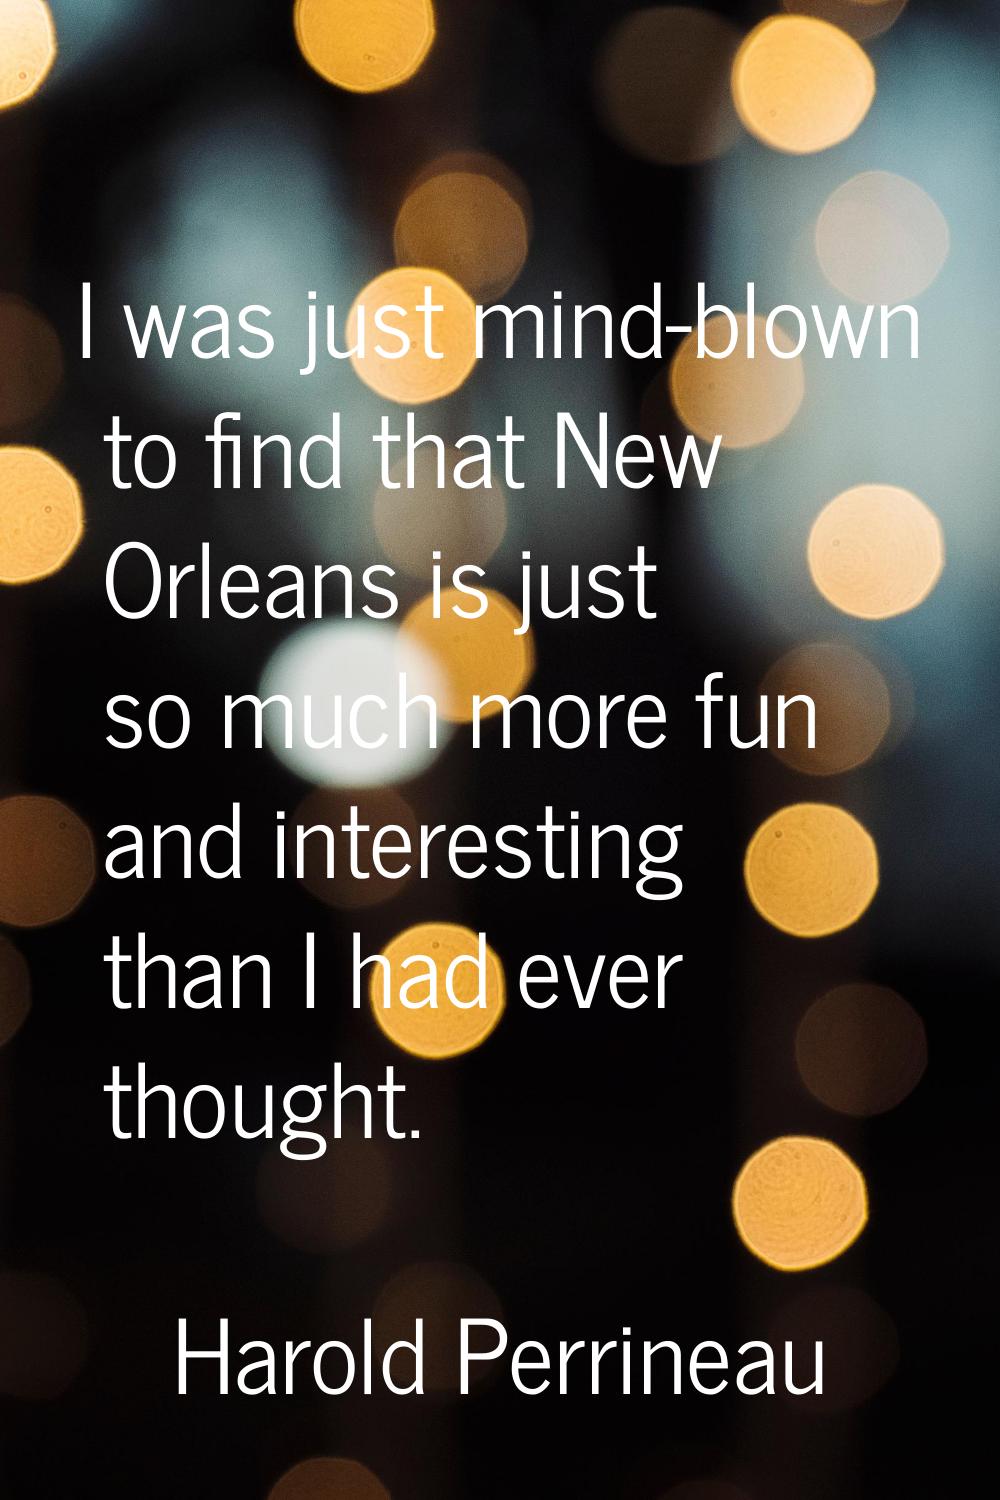 I was just mind-blown to find that New Orleans is just so much more fun and interesting than I had 